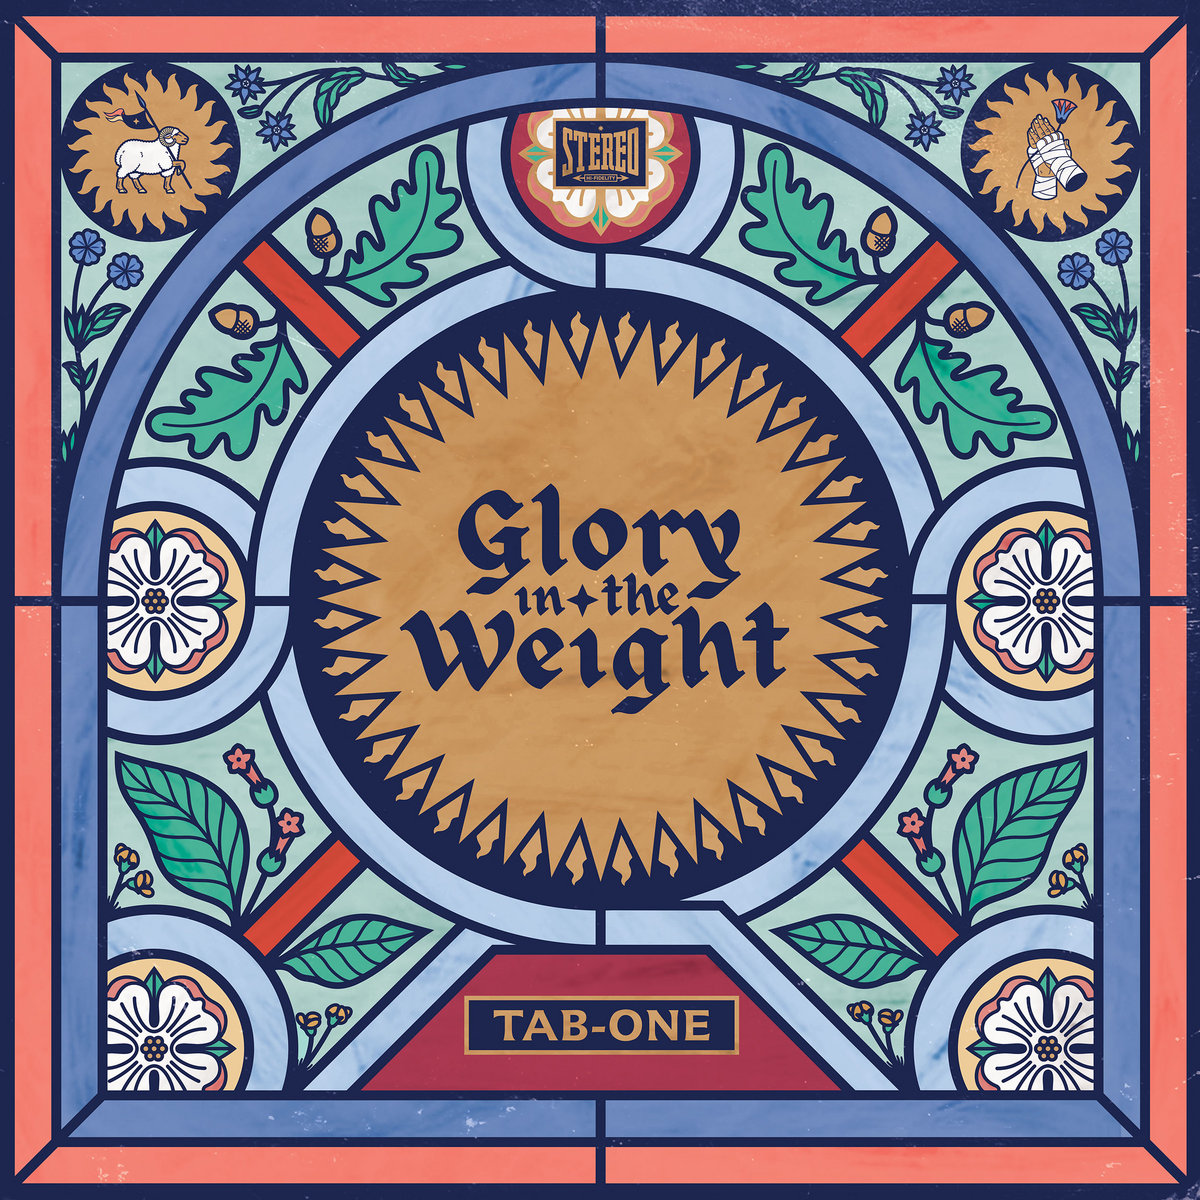 Glory_in_the_weight_tab-one